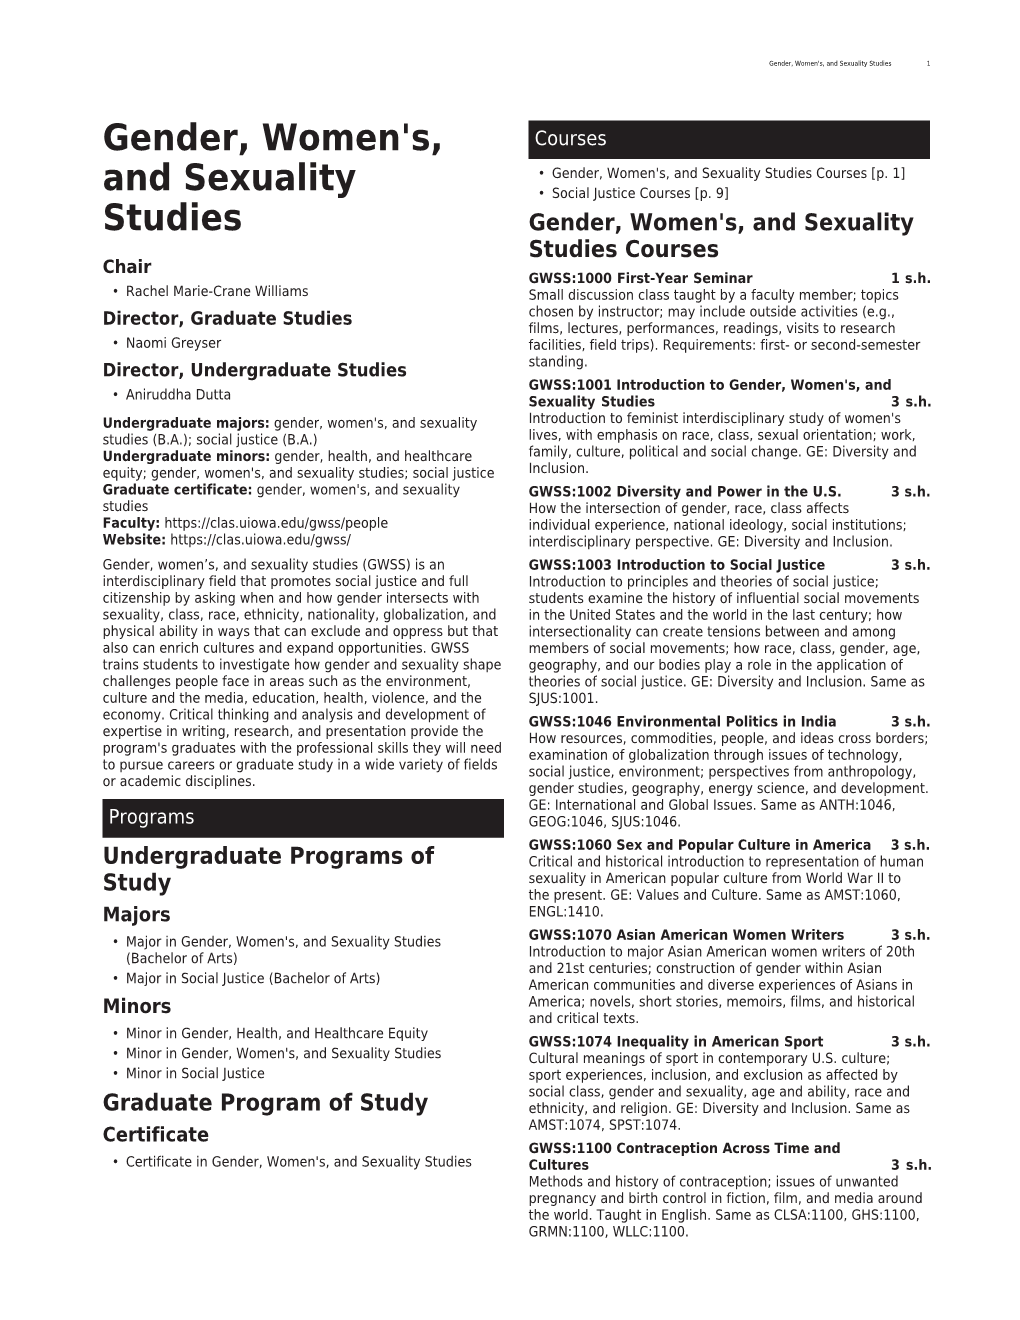 Gender, Women's, and Sexuality Studies Courses [P